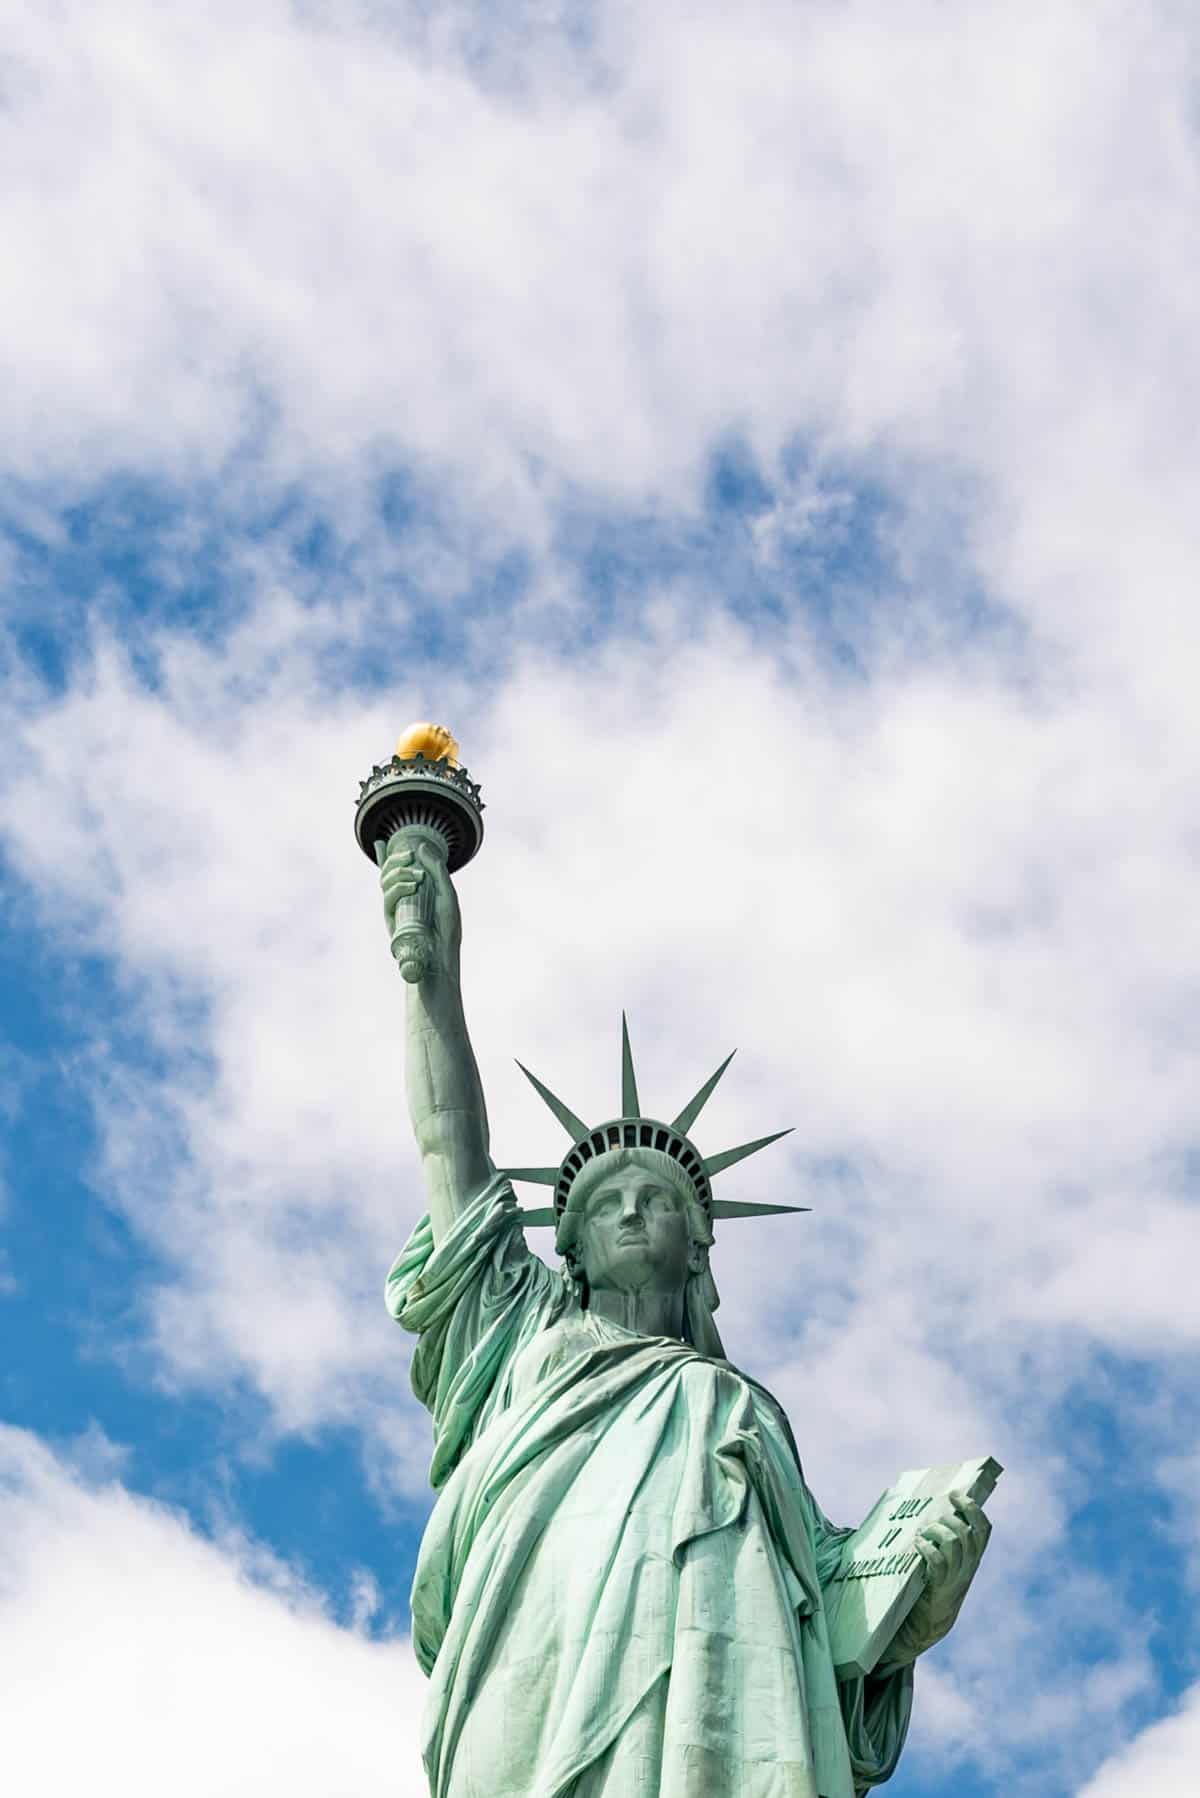 An image of the Statue of Liberty with the blue sky and white clouds behind it.